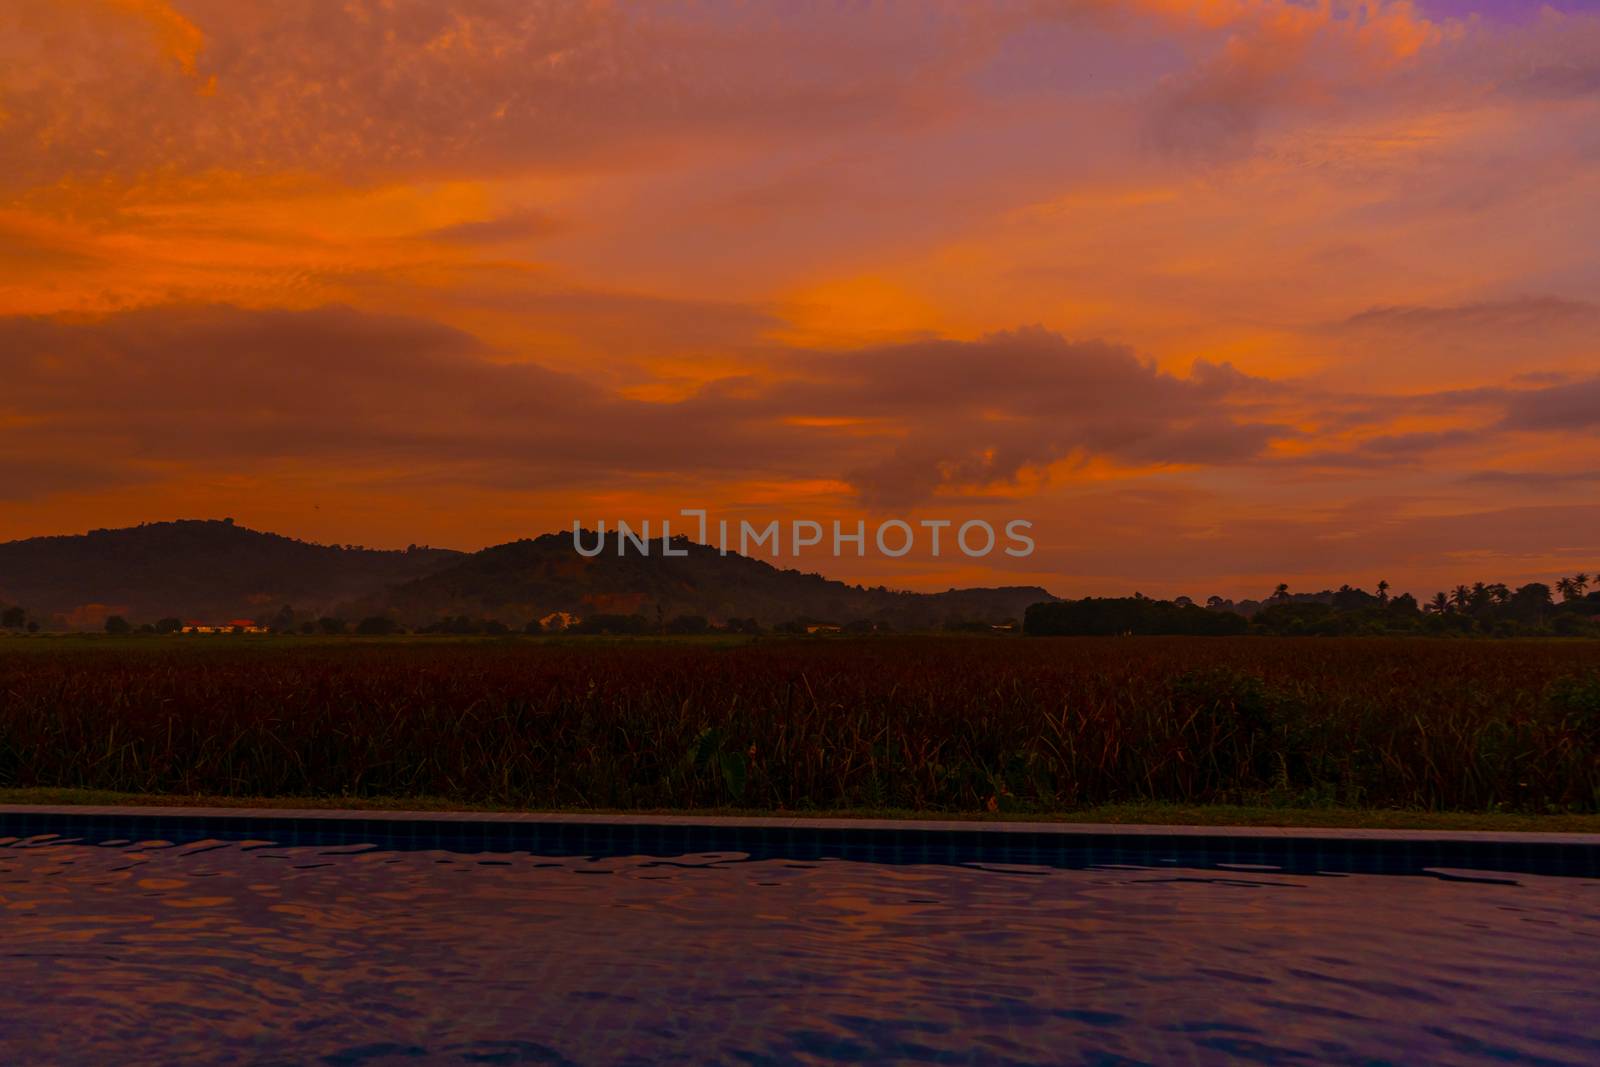 Unusual orange fiery sunset in the tropics. View from the pool to a rice field and mountains.